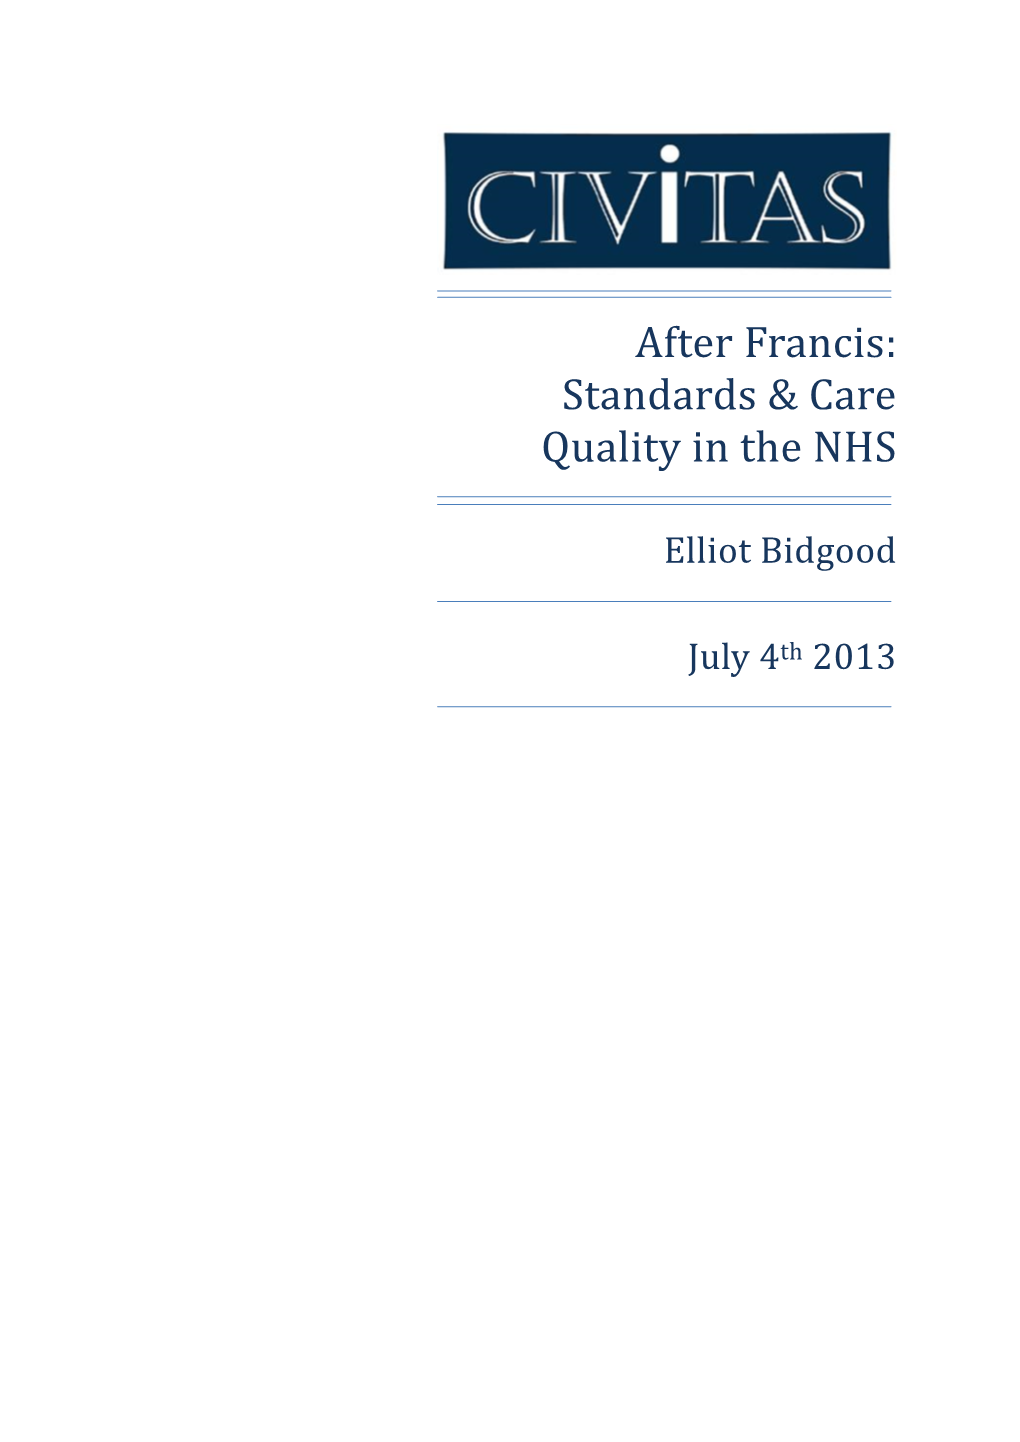 After Francis: Standards & Care Quality in The